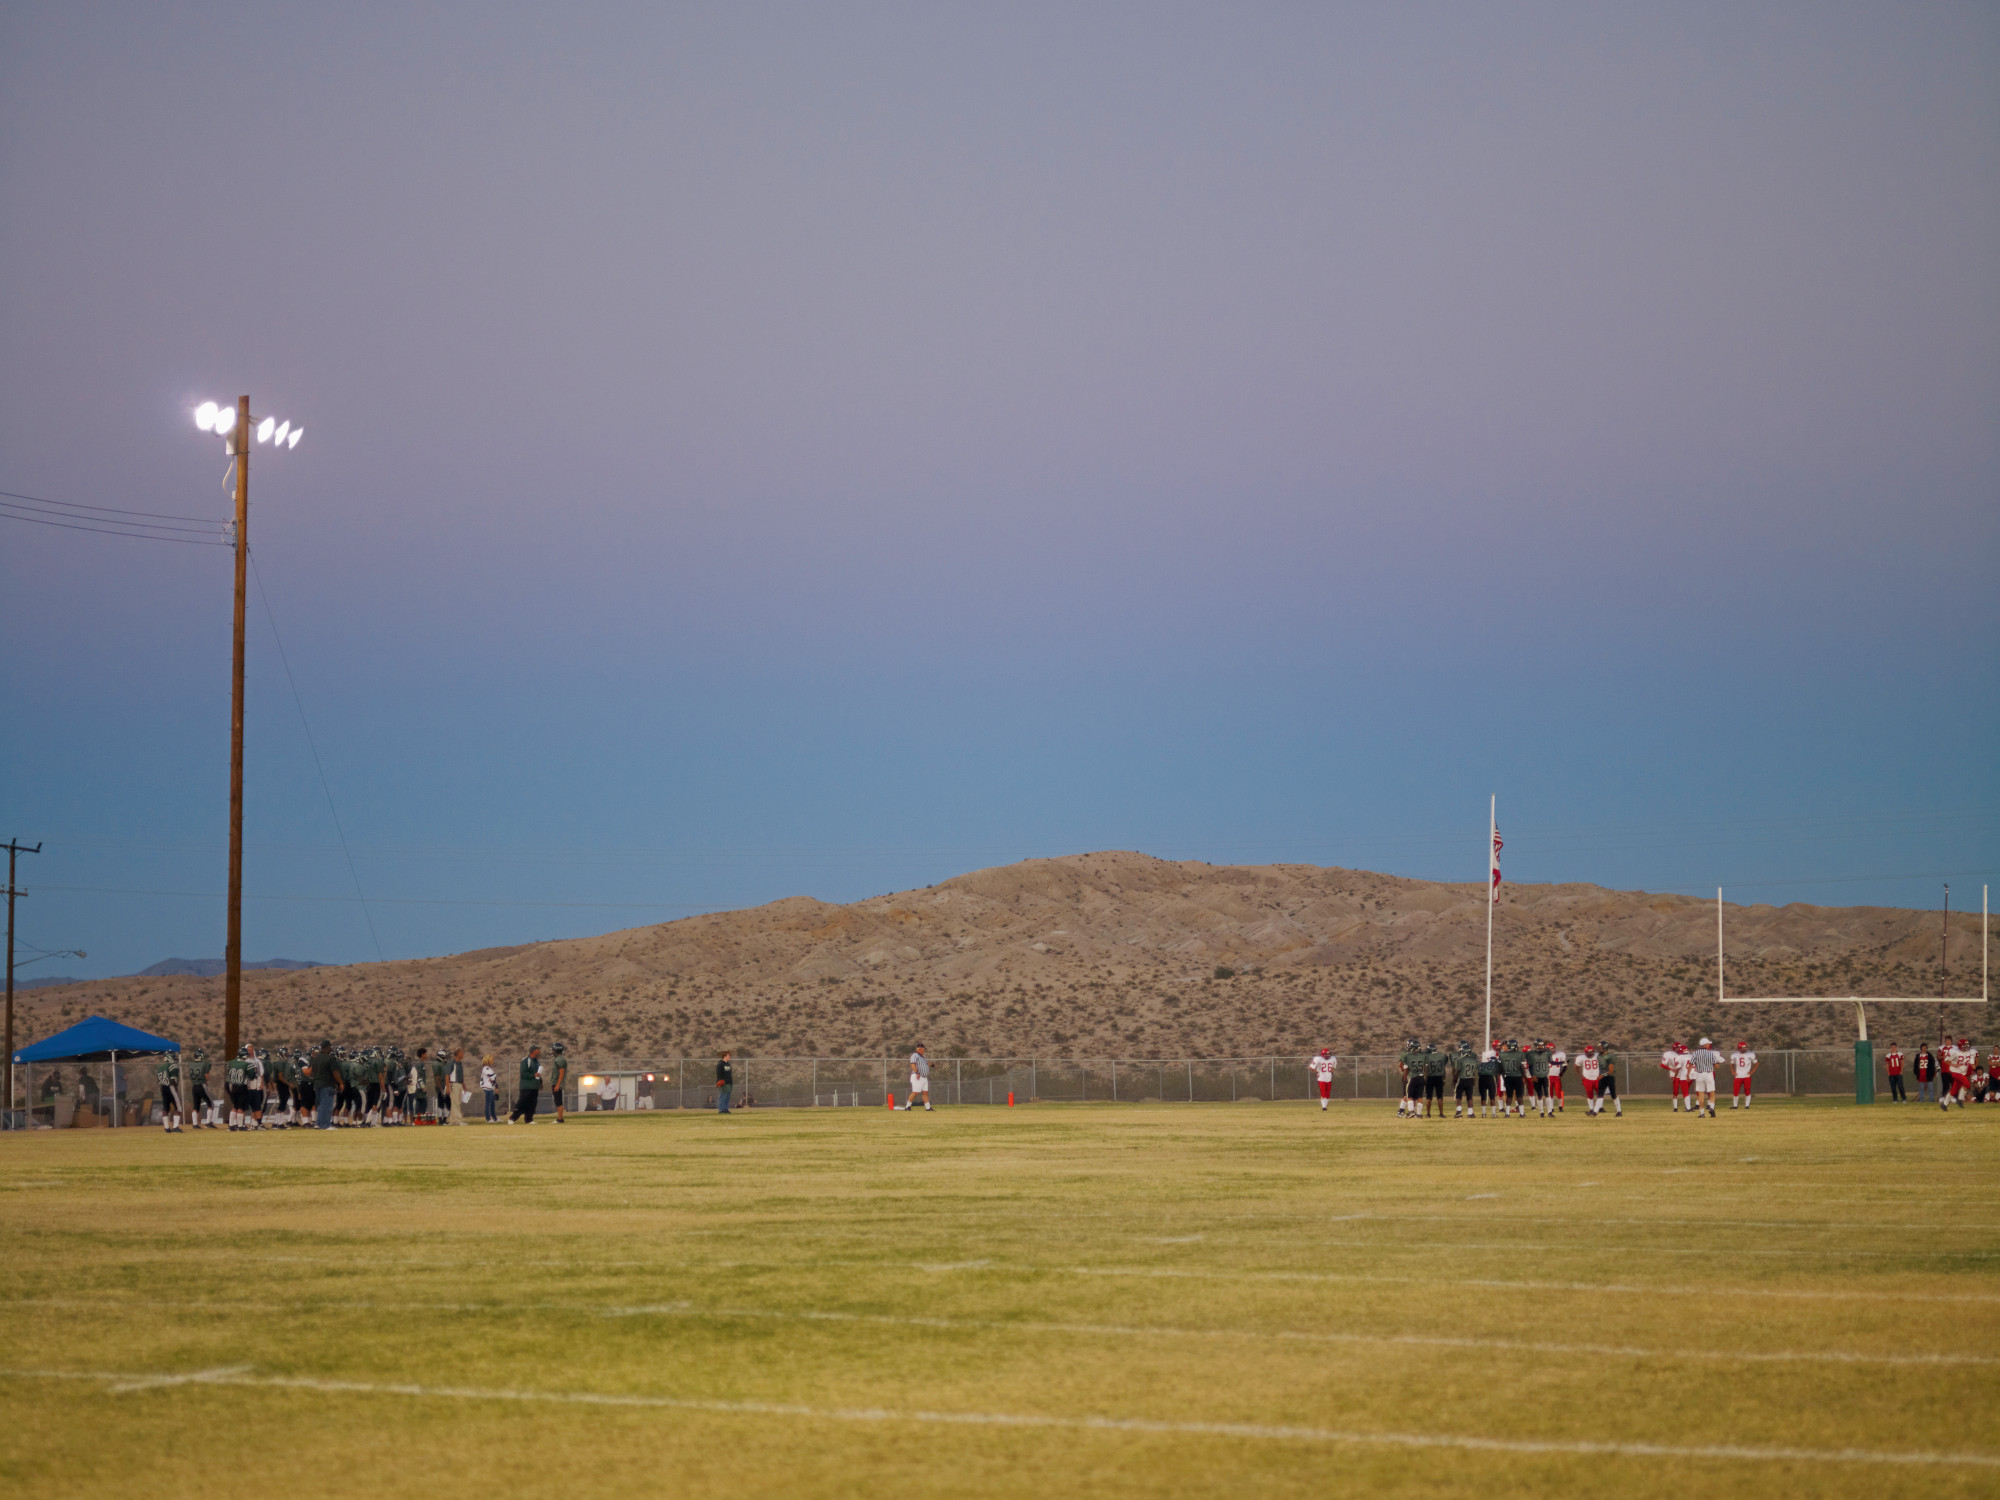 Football Landscape #14 (Twentynine Palms vs. Big Bear, Twentynine Palms, CA), 2008. Chromogenic print, 48 × 64 in. (121.9 × 162.6 cm). Picture credit: courtesy the artist and Regen Projects, Los Angeles; Lehmann Maupin, New York/Hong Kong/Seoul/London; Thomas Dane Gallery, London and Naples; and Peder Lund, Oslo